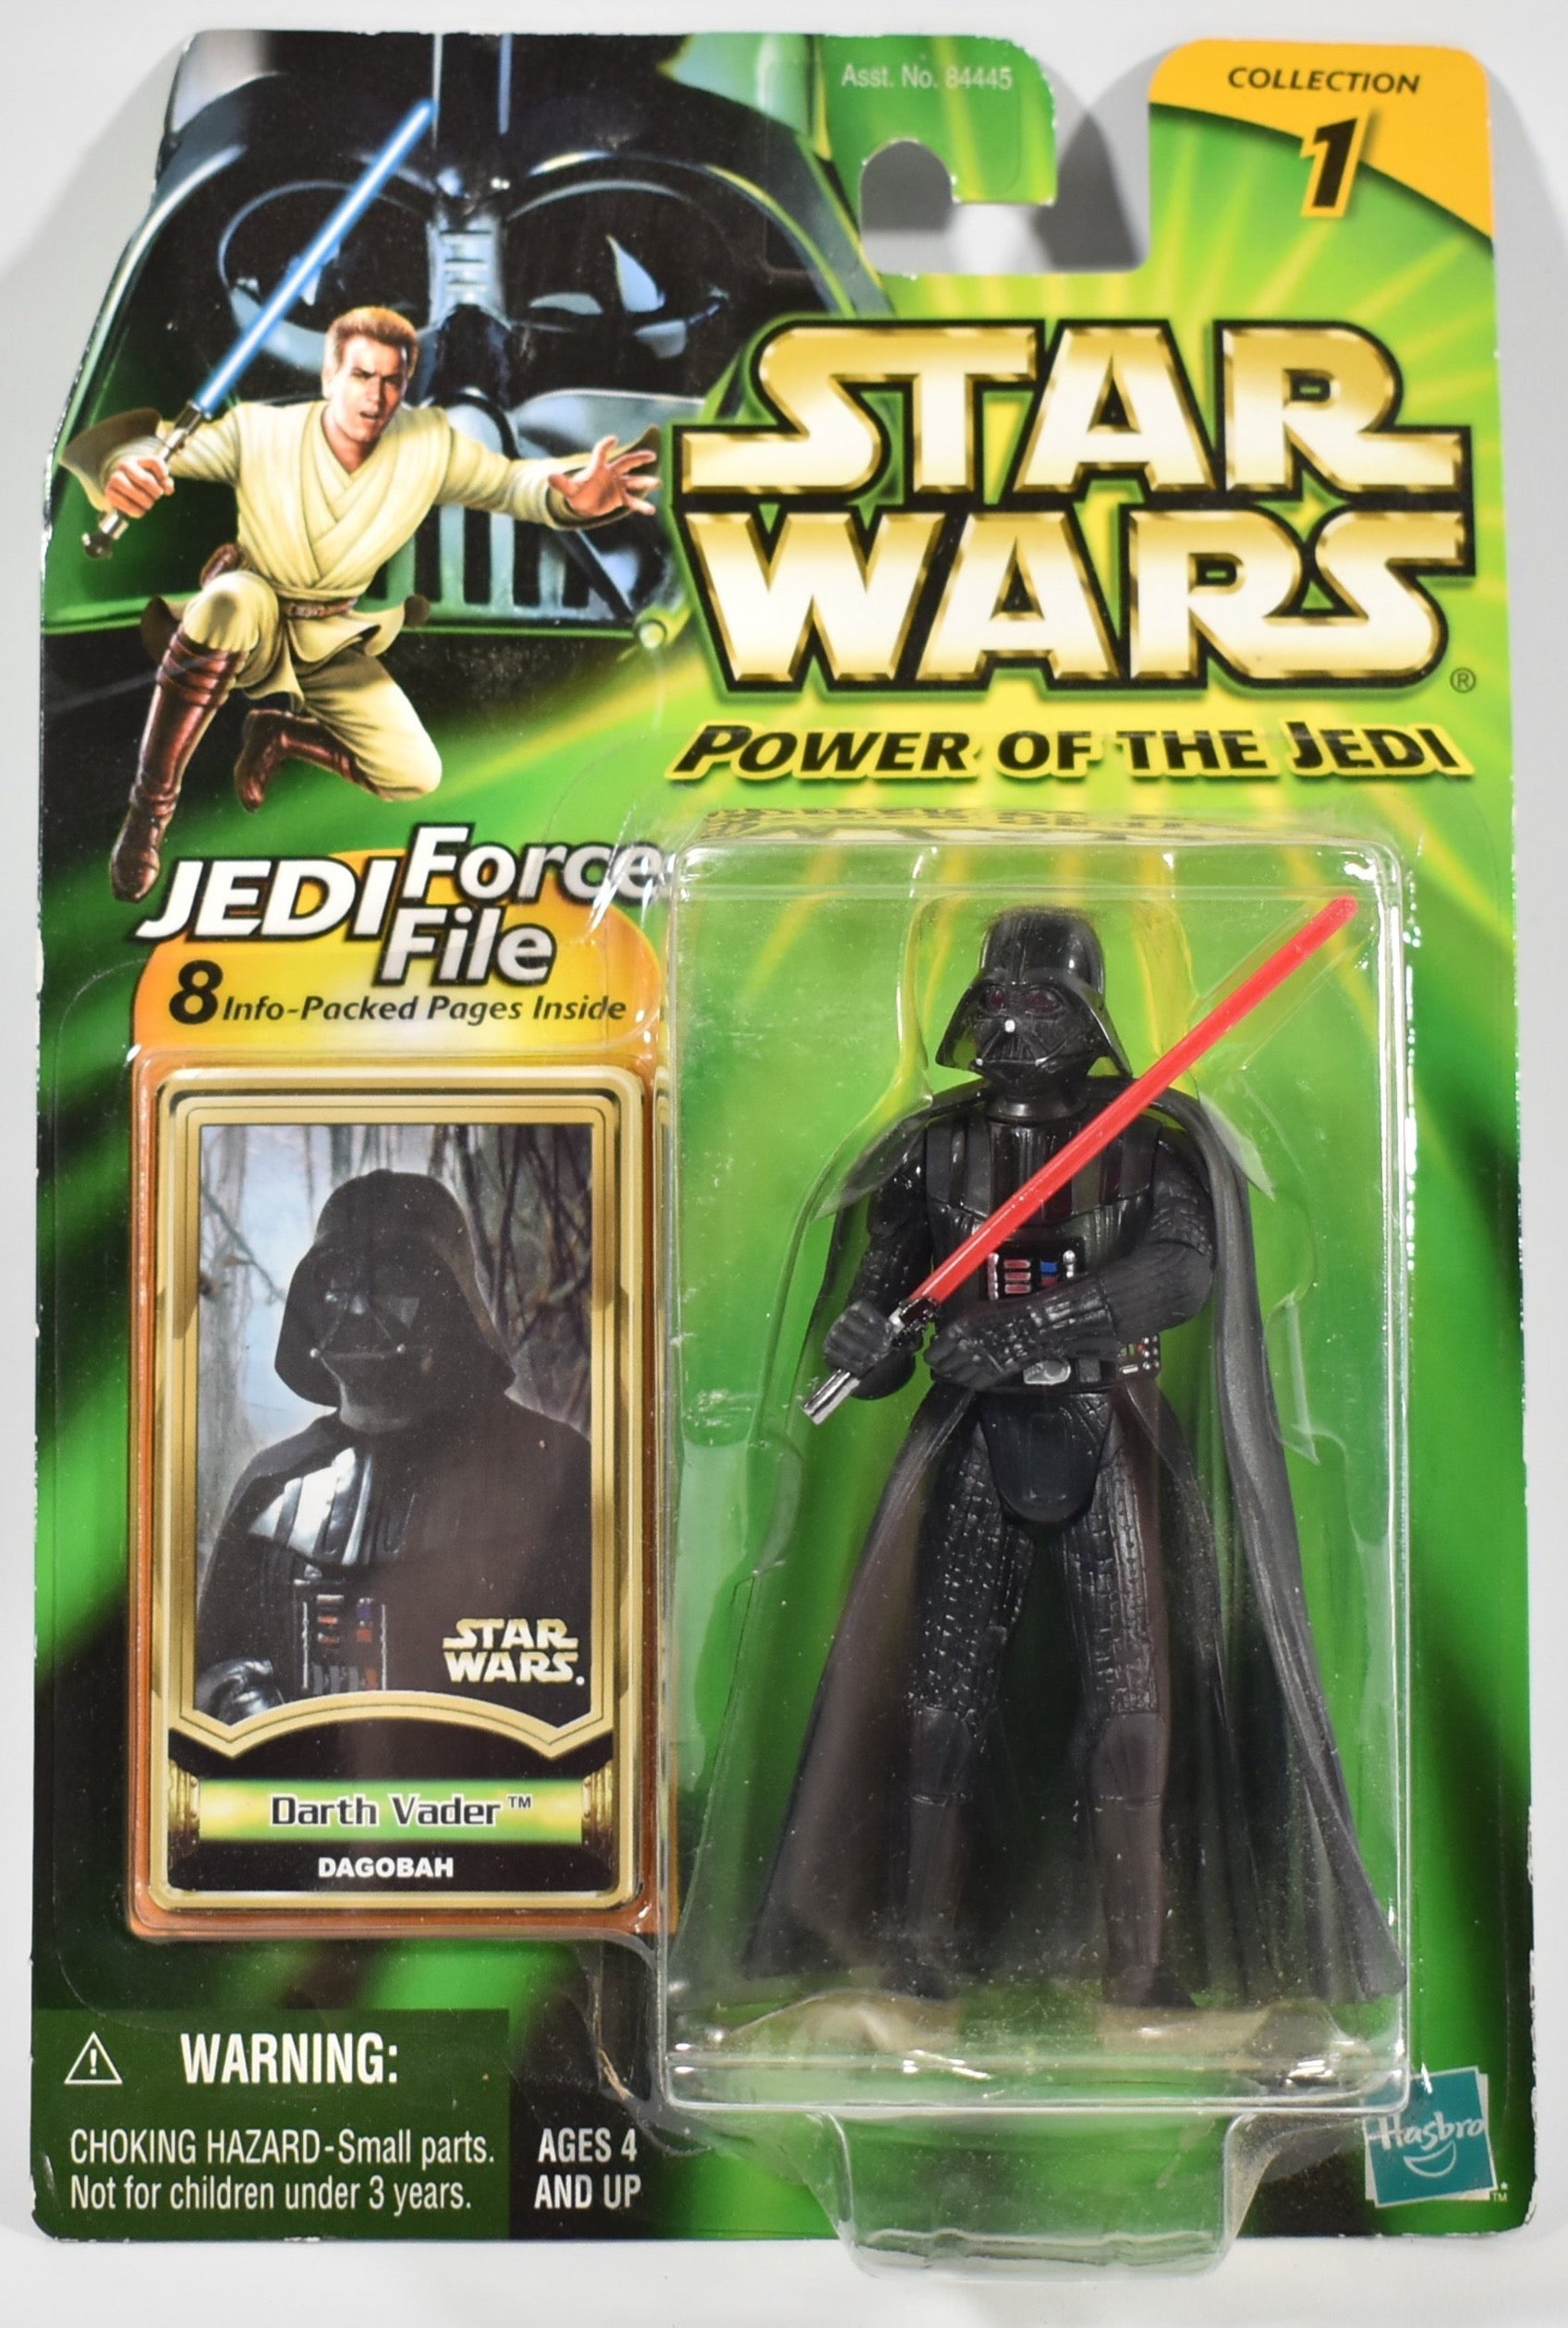 Star Wars Power of the Jedi Action Figure Darth Vader